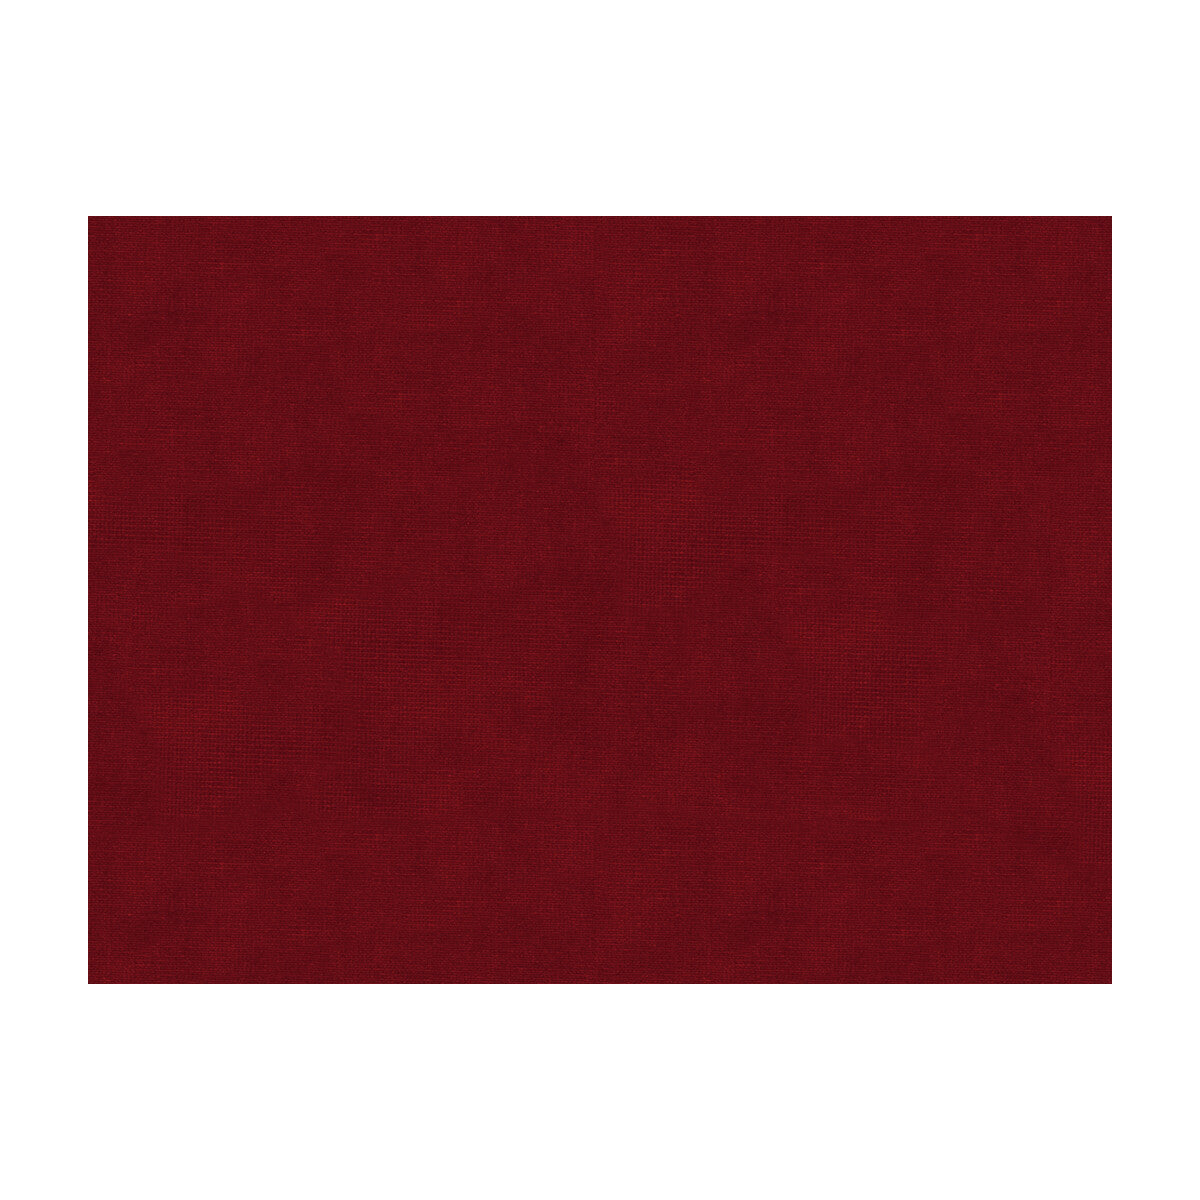 Charmant Velvet fabric in lacquer red color - pattern 8013150.919.0 - by Brunschwig &amp; Fils